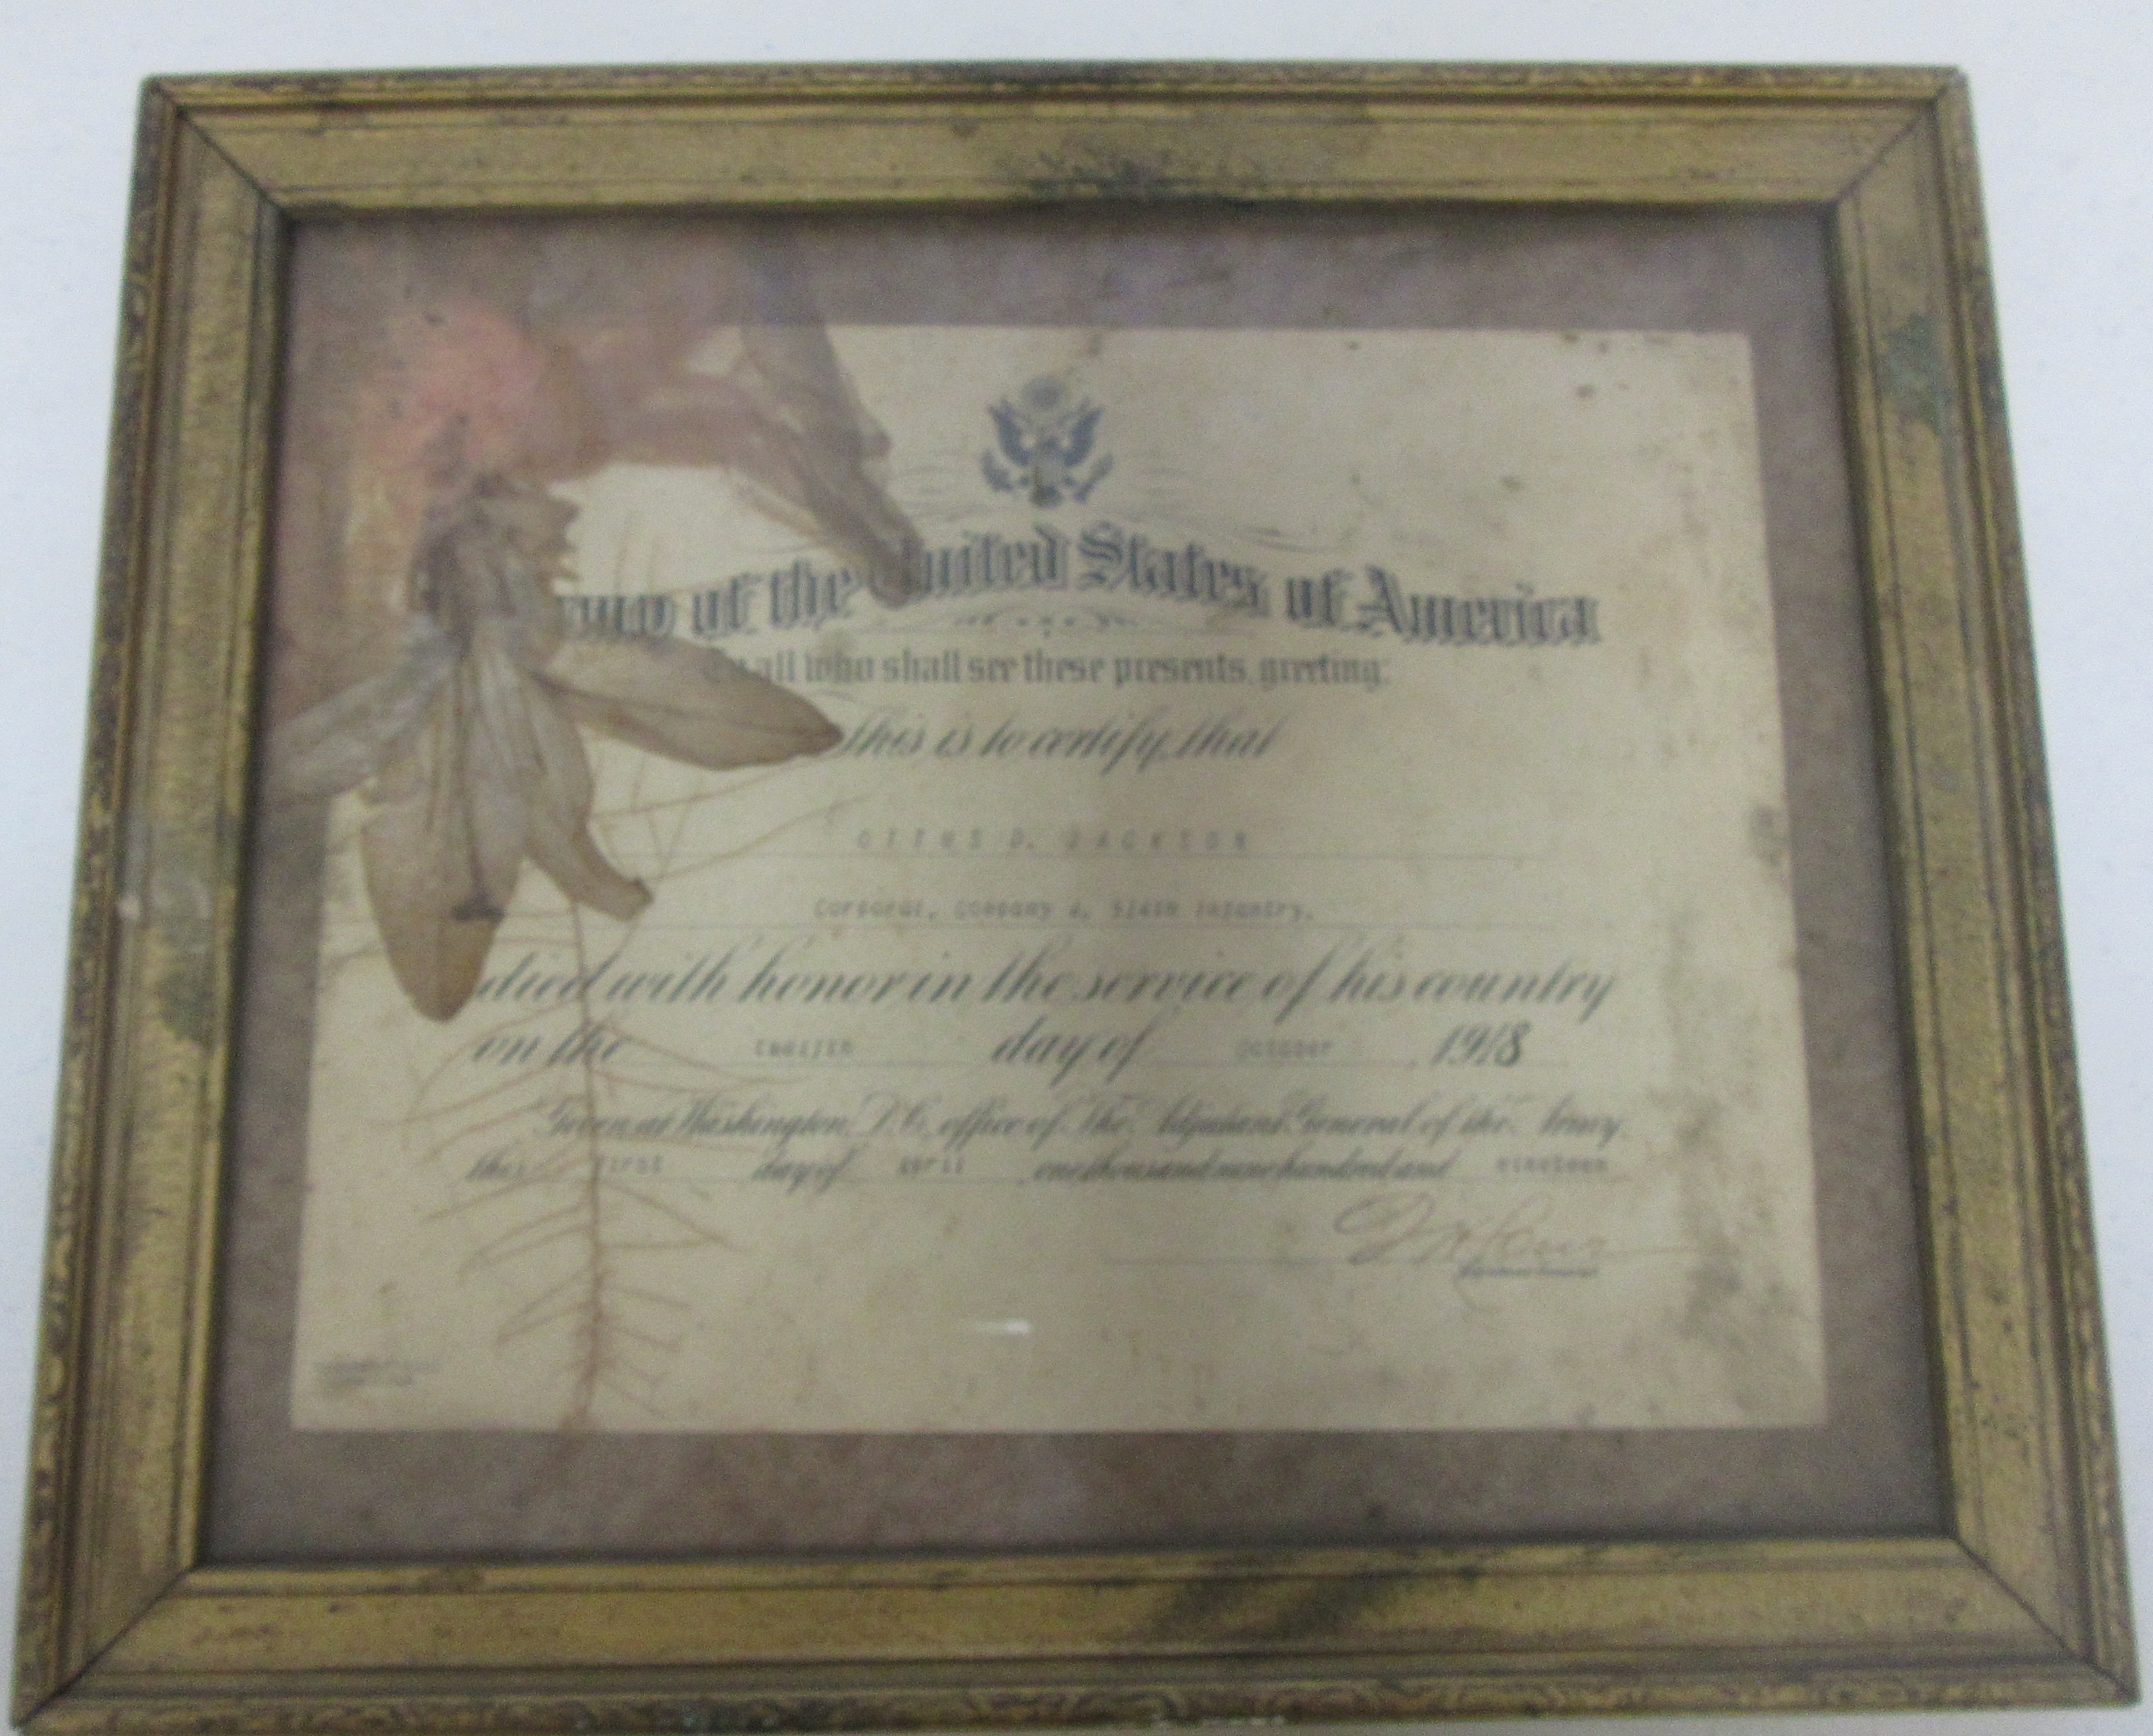 Certificate of Honorable Death - flowers from his casket are in the frame